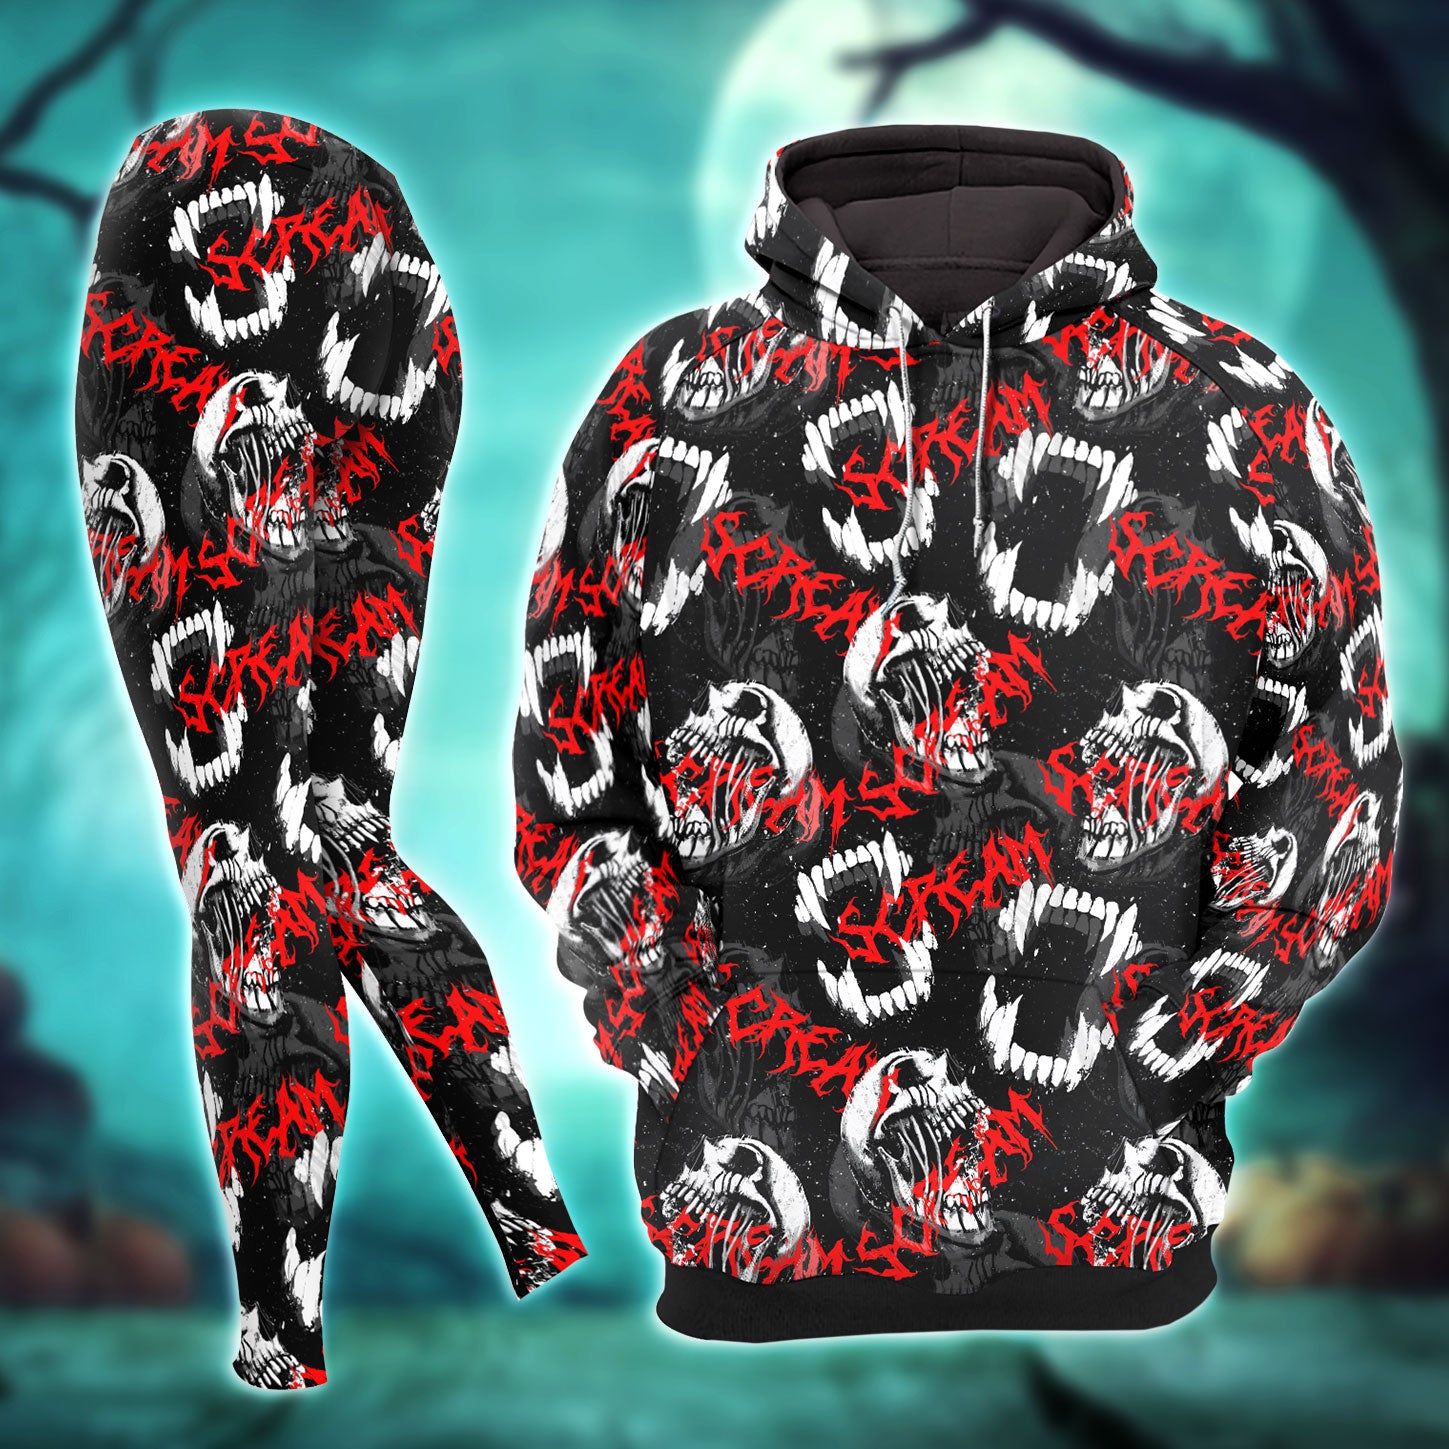 Black Skull Scream Gothic Combo Hoodie and Leggings - Dark and edgy matching set with skull designs for a unique and stylish look